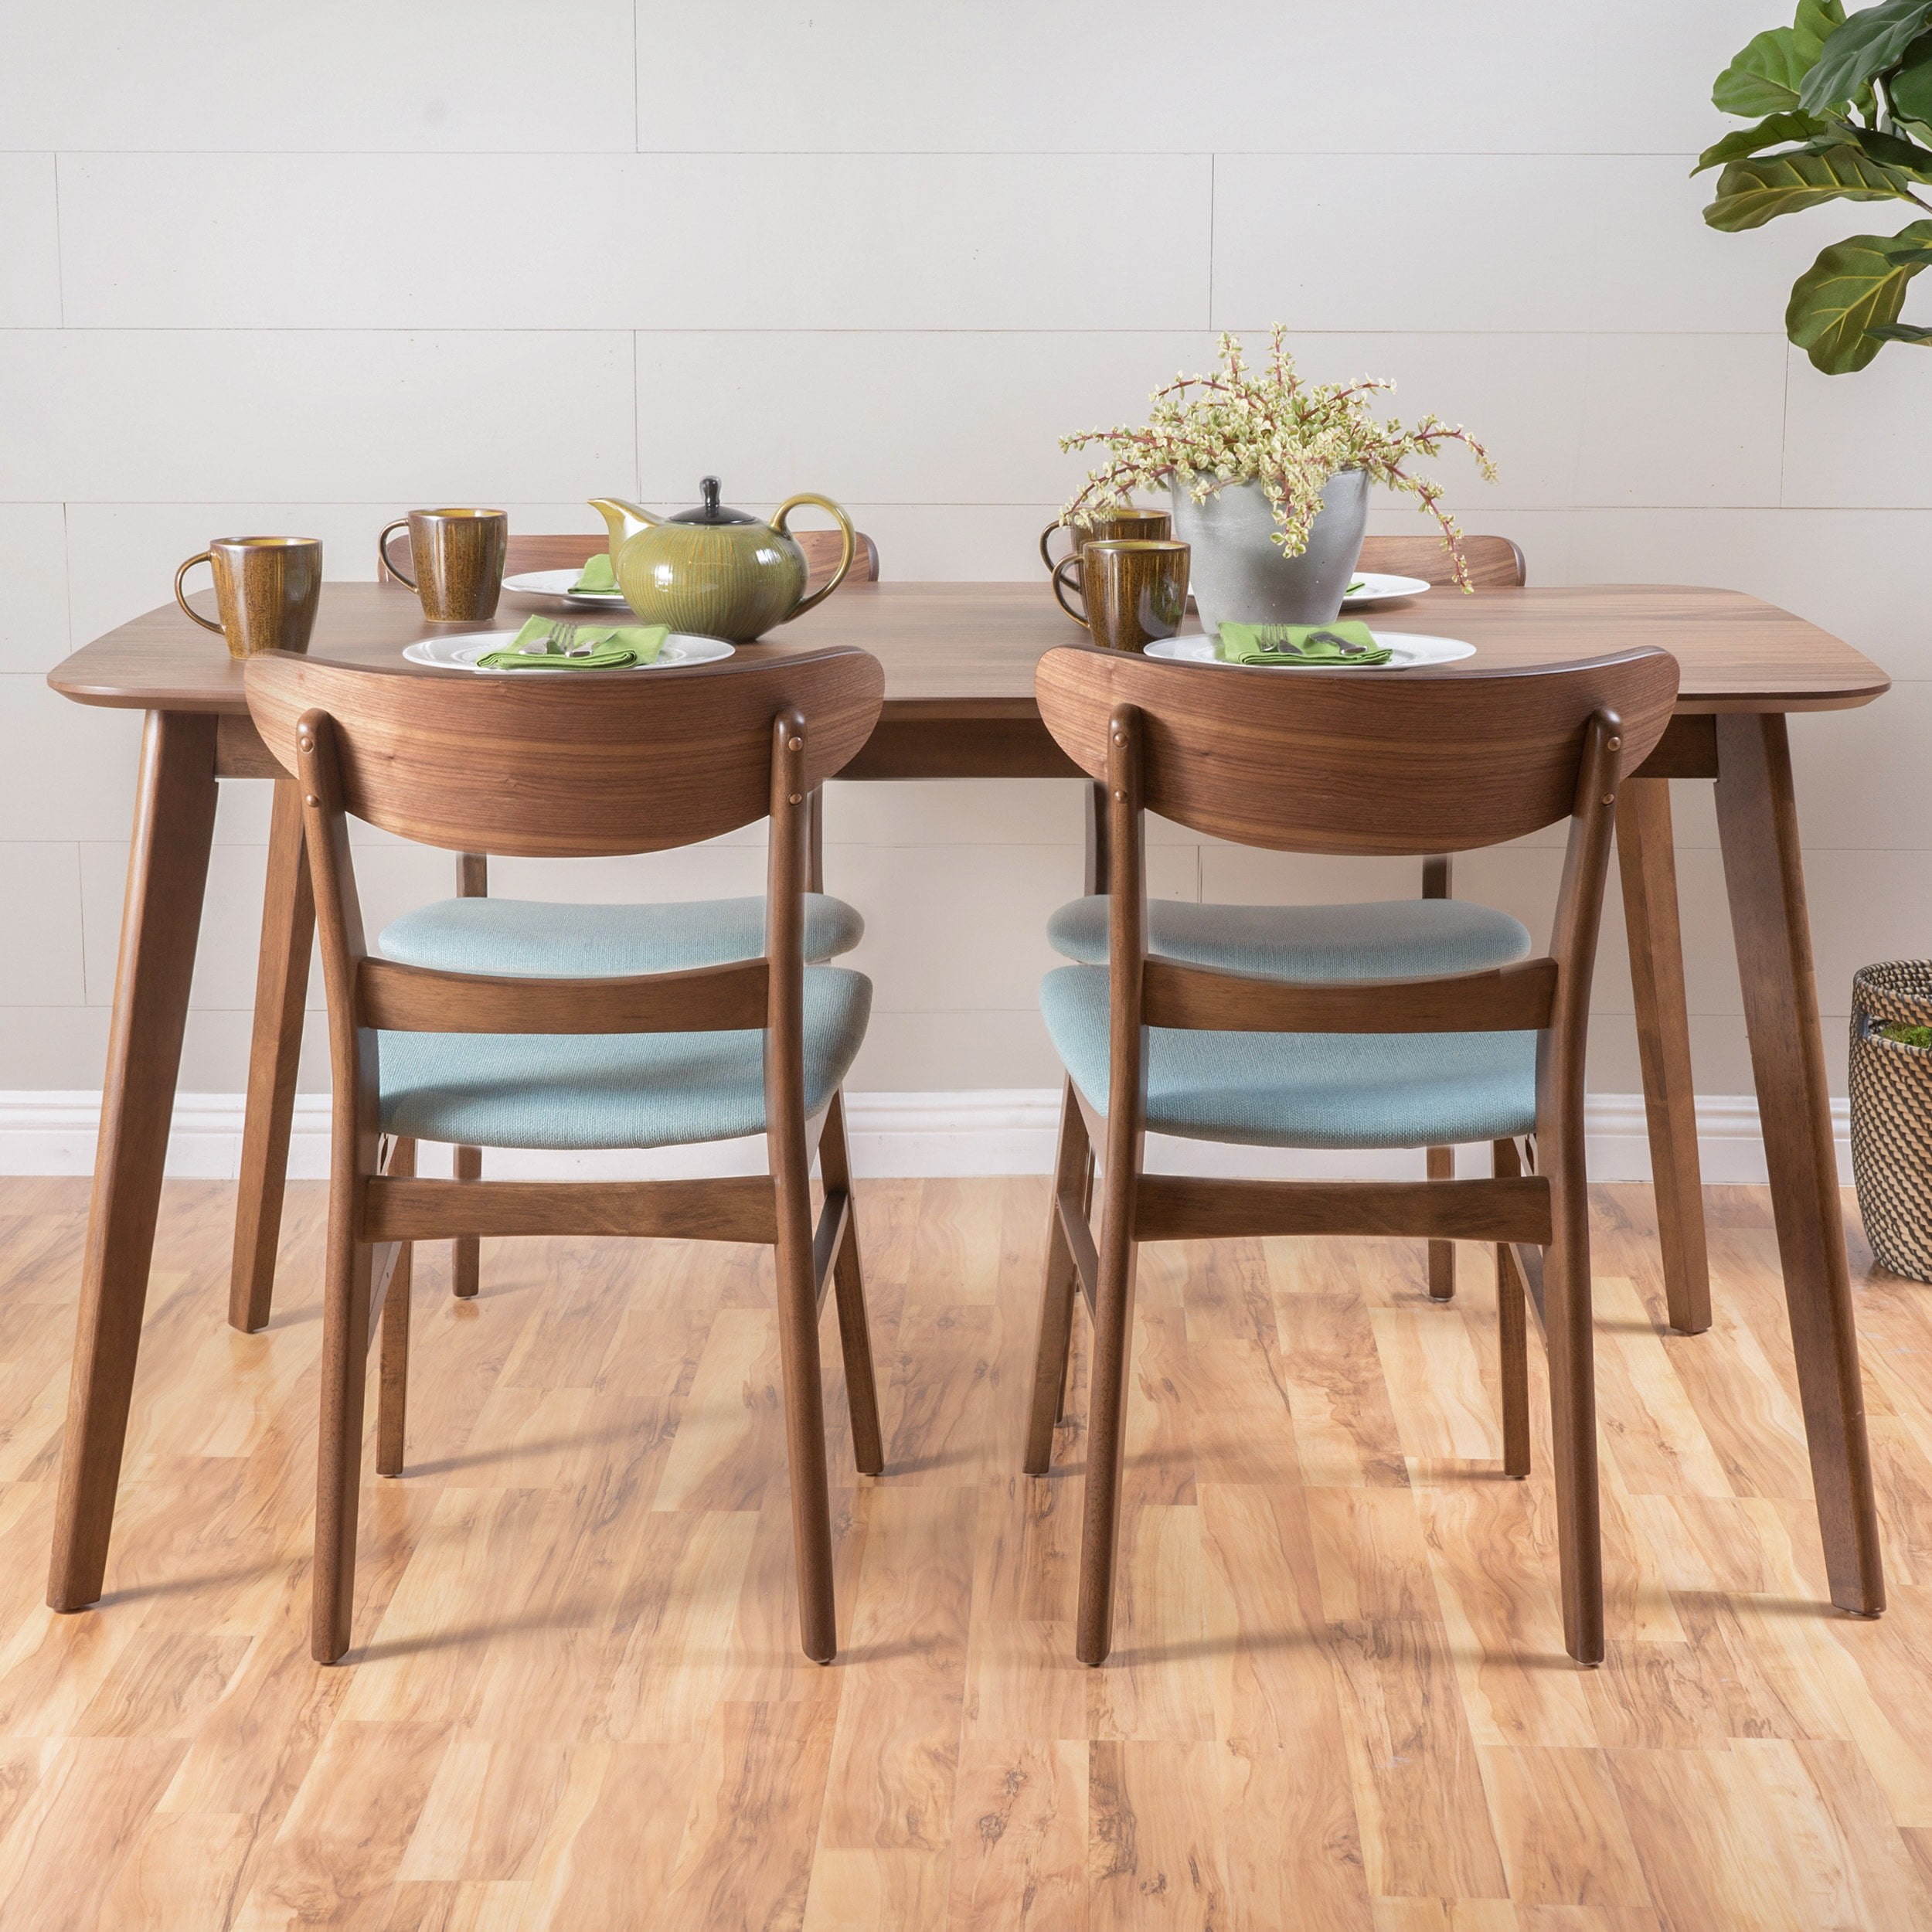 Noble House Lydia Mid-Century Modern 5 Piece Dining Set, Mint and Natural Walnut